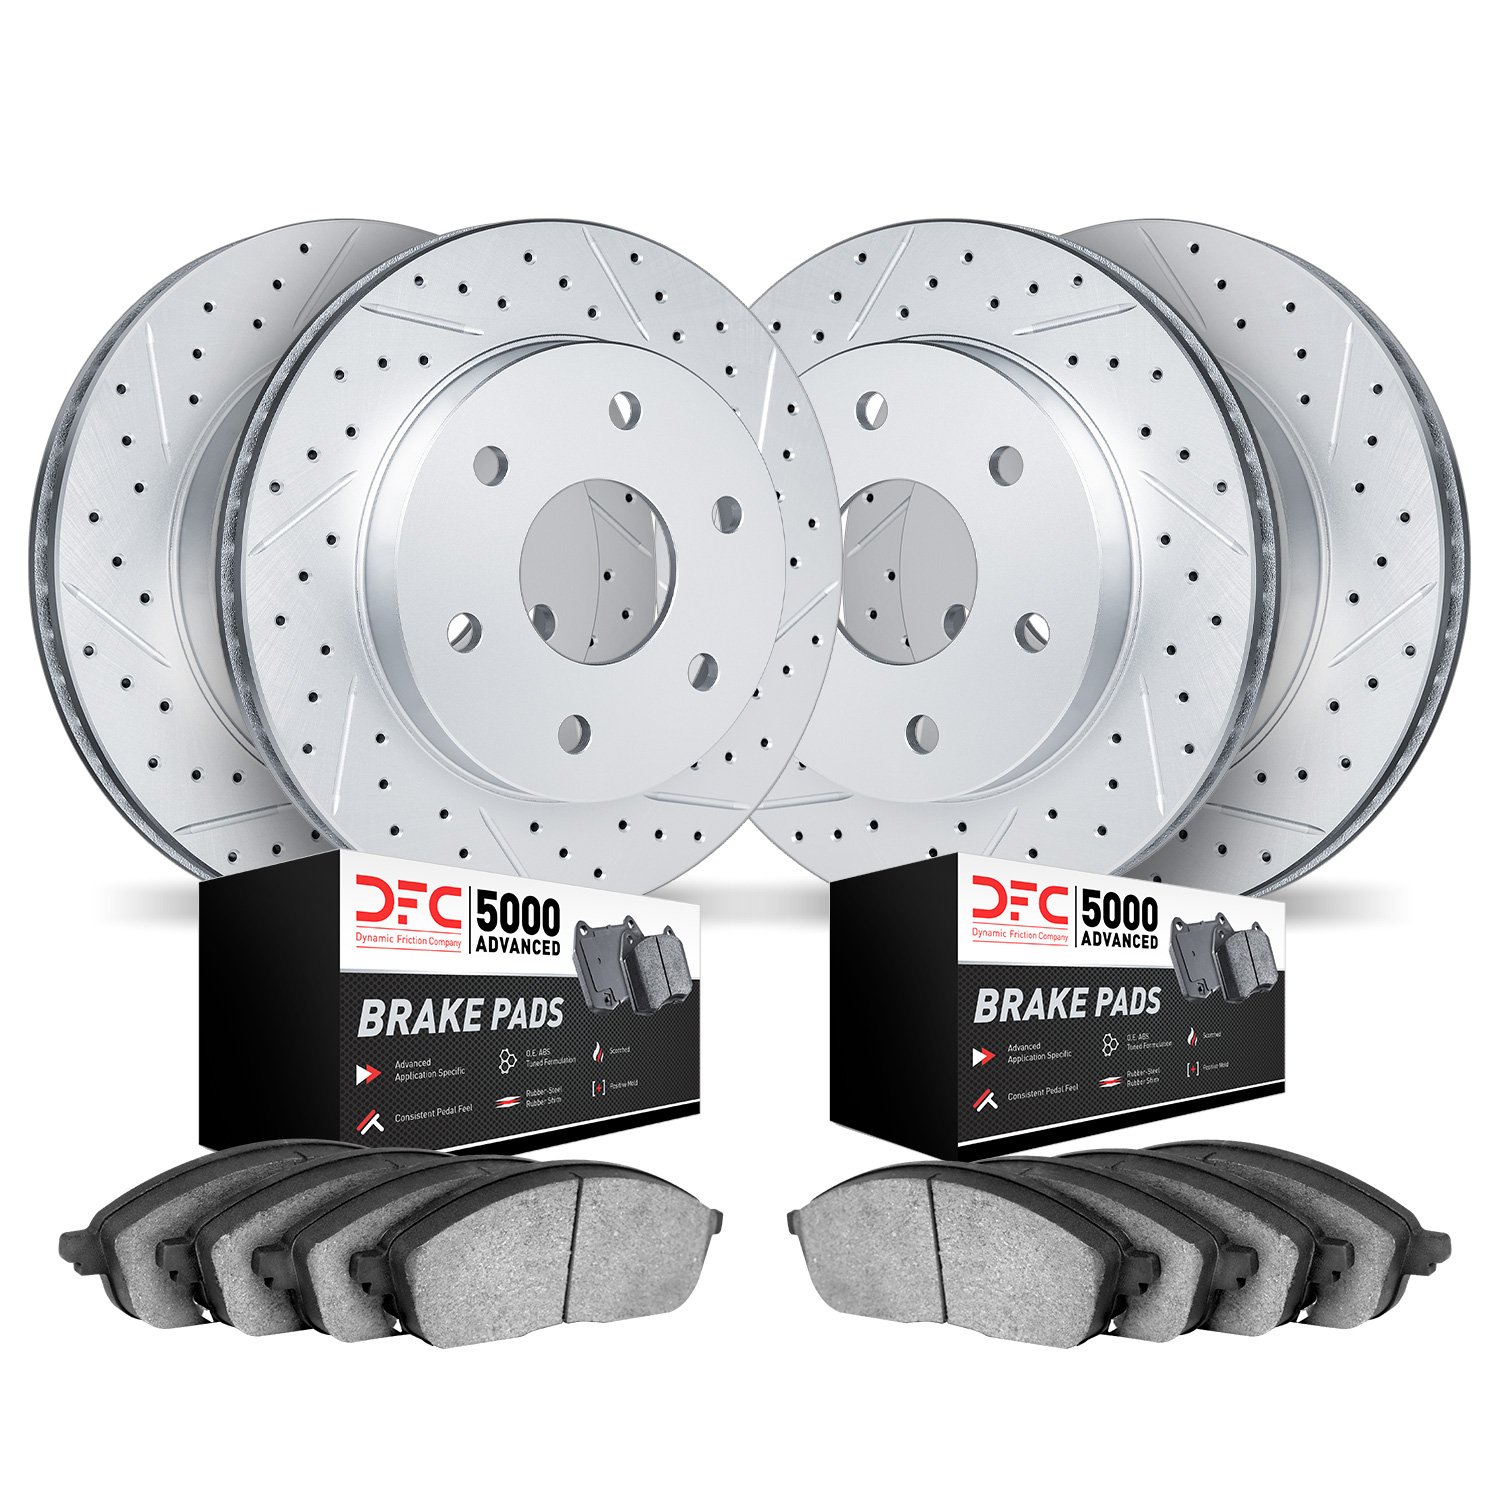 2504-68011 Geoperformance Drilled/Slotted Rotors w/5000 Advanced Brake Pads Kit, Fits Select Infiniti/Nissan, Position: Front an